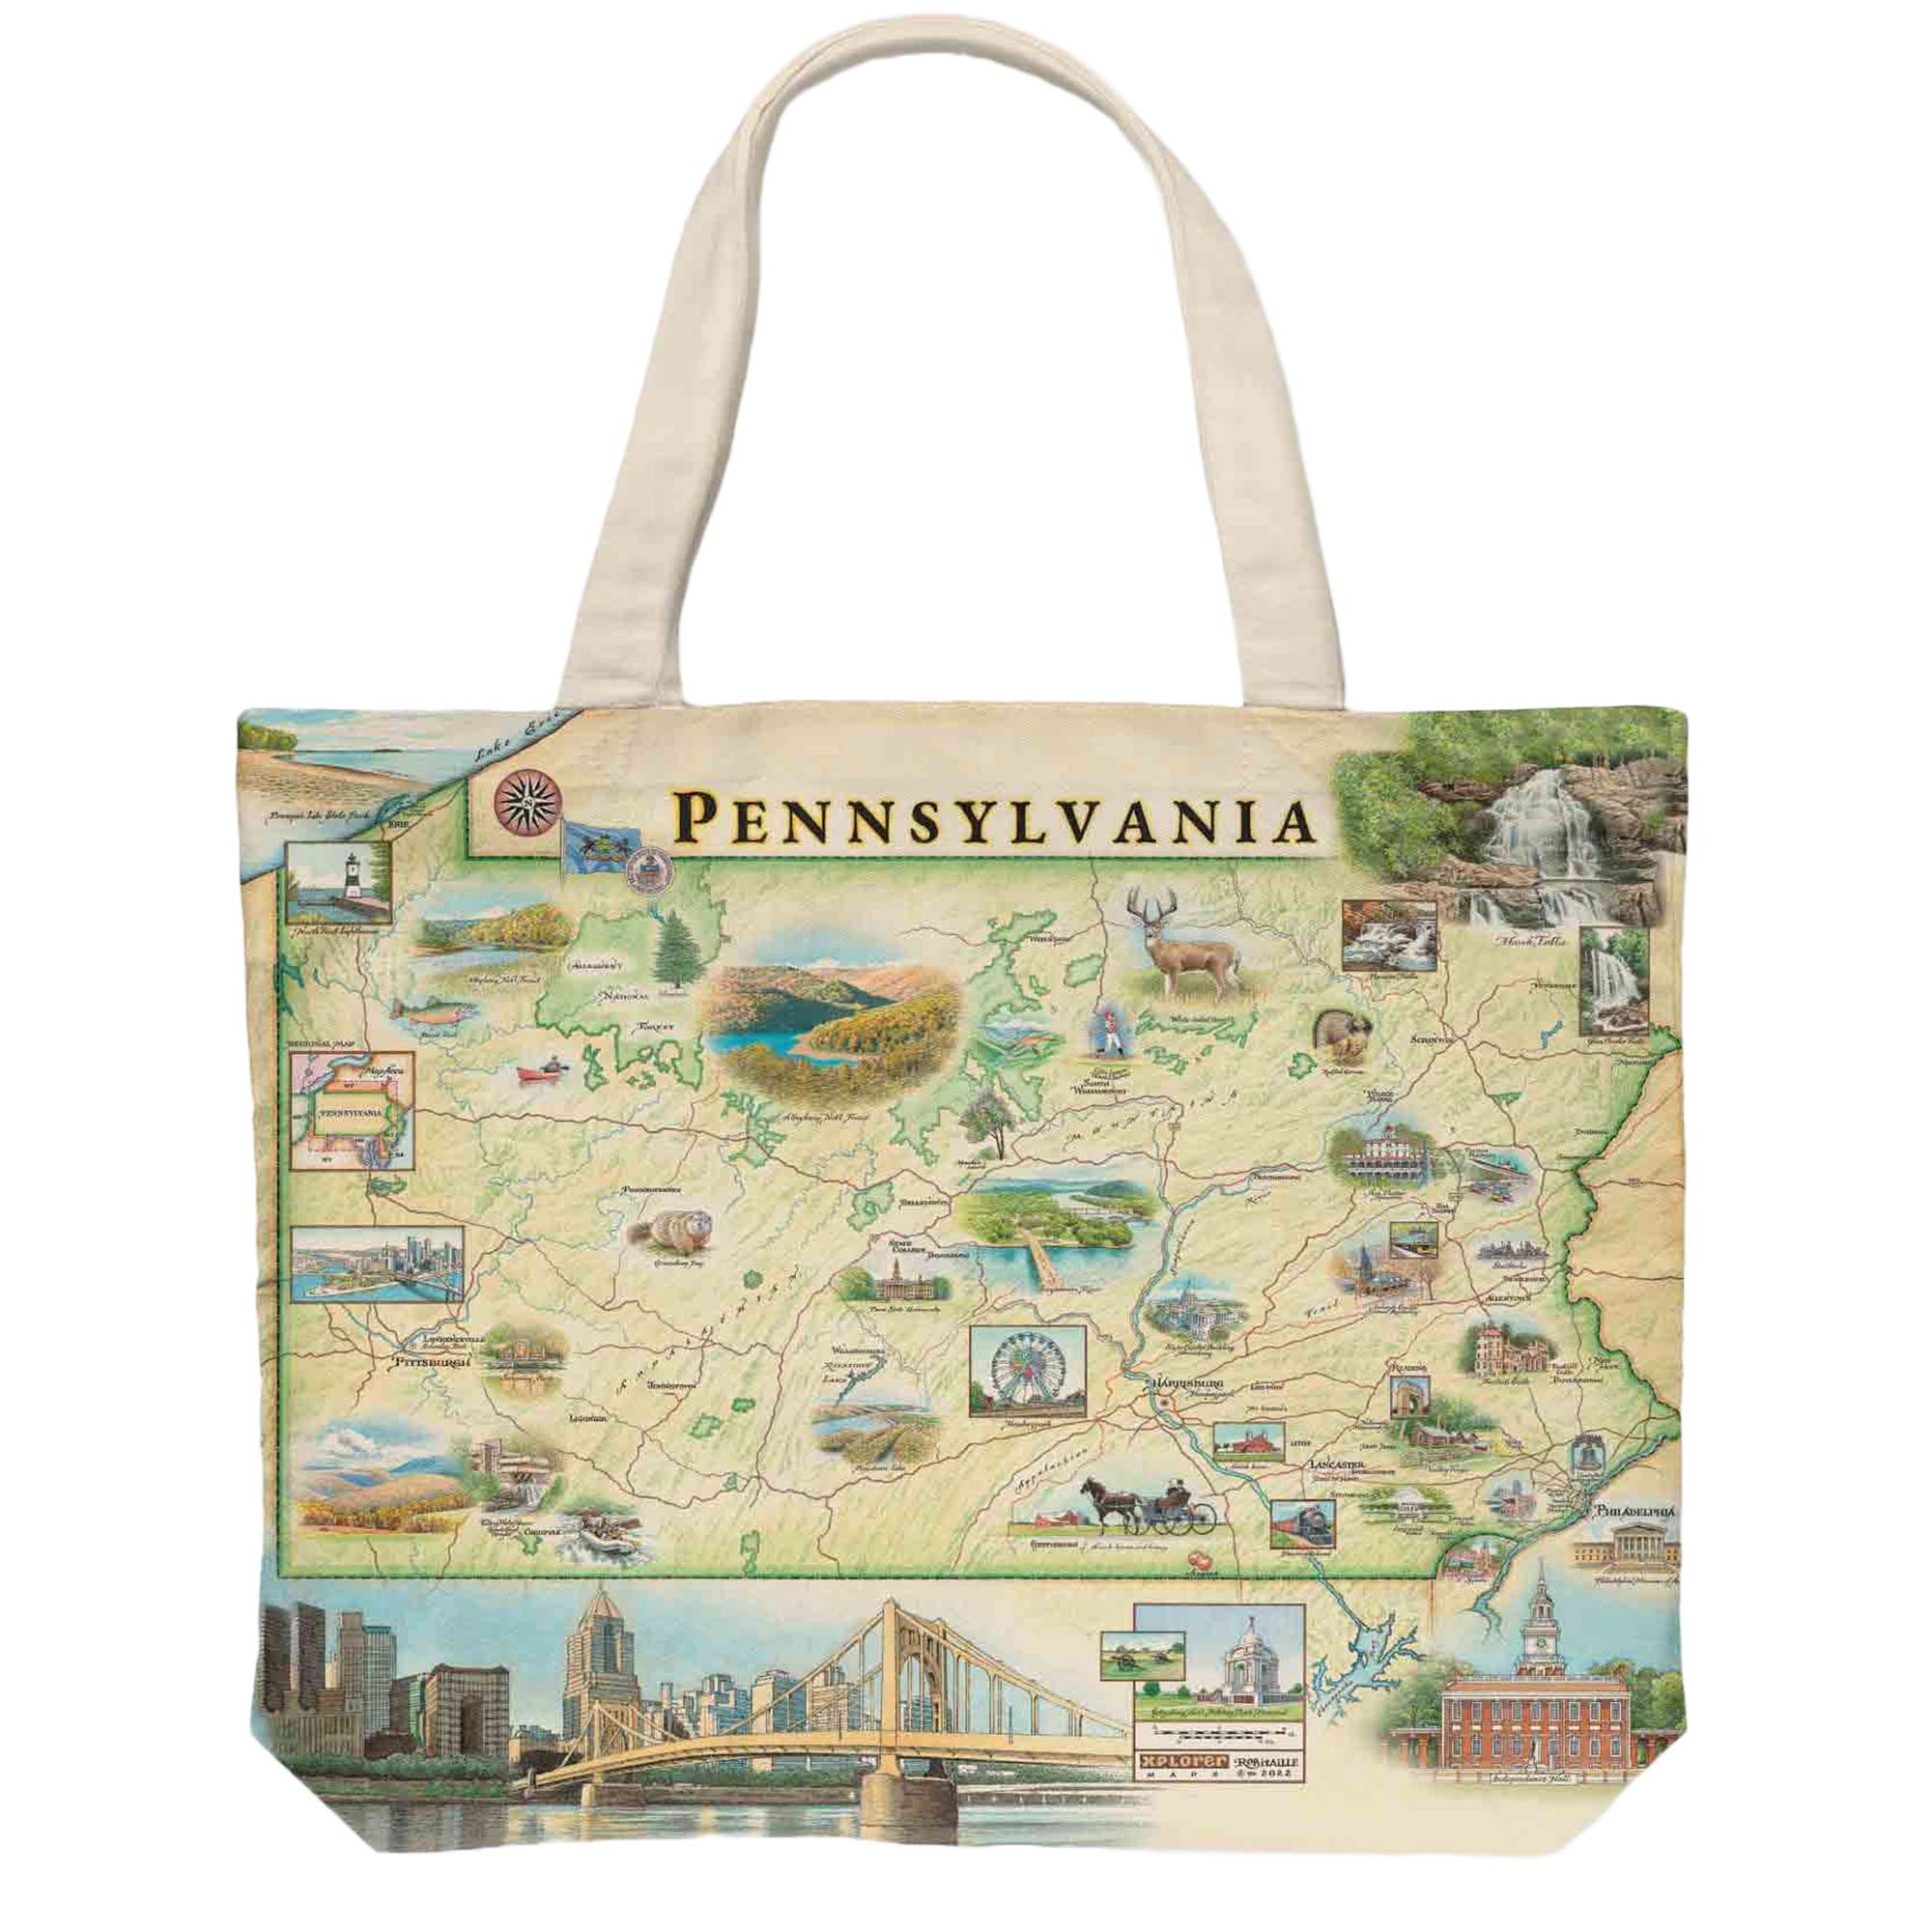 Pennsylvania State Canvas Tote Bag featuring Pittsburg, Philadelphia, Hersey, Amish horse and buggy, Poconos, waterfalls, deer, trains, and buildings.